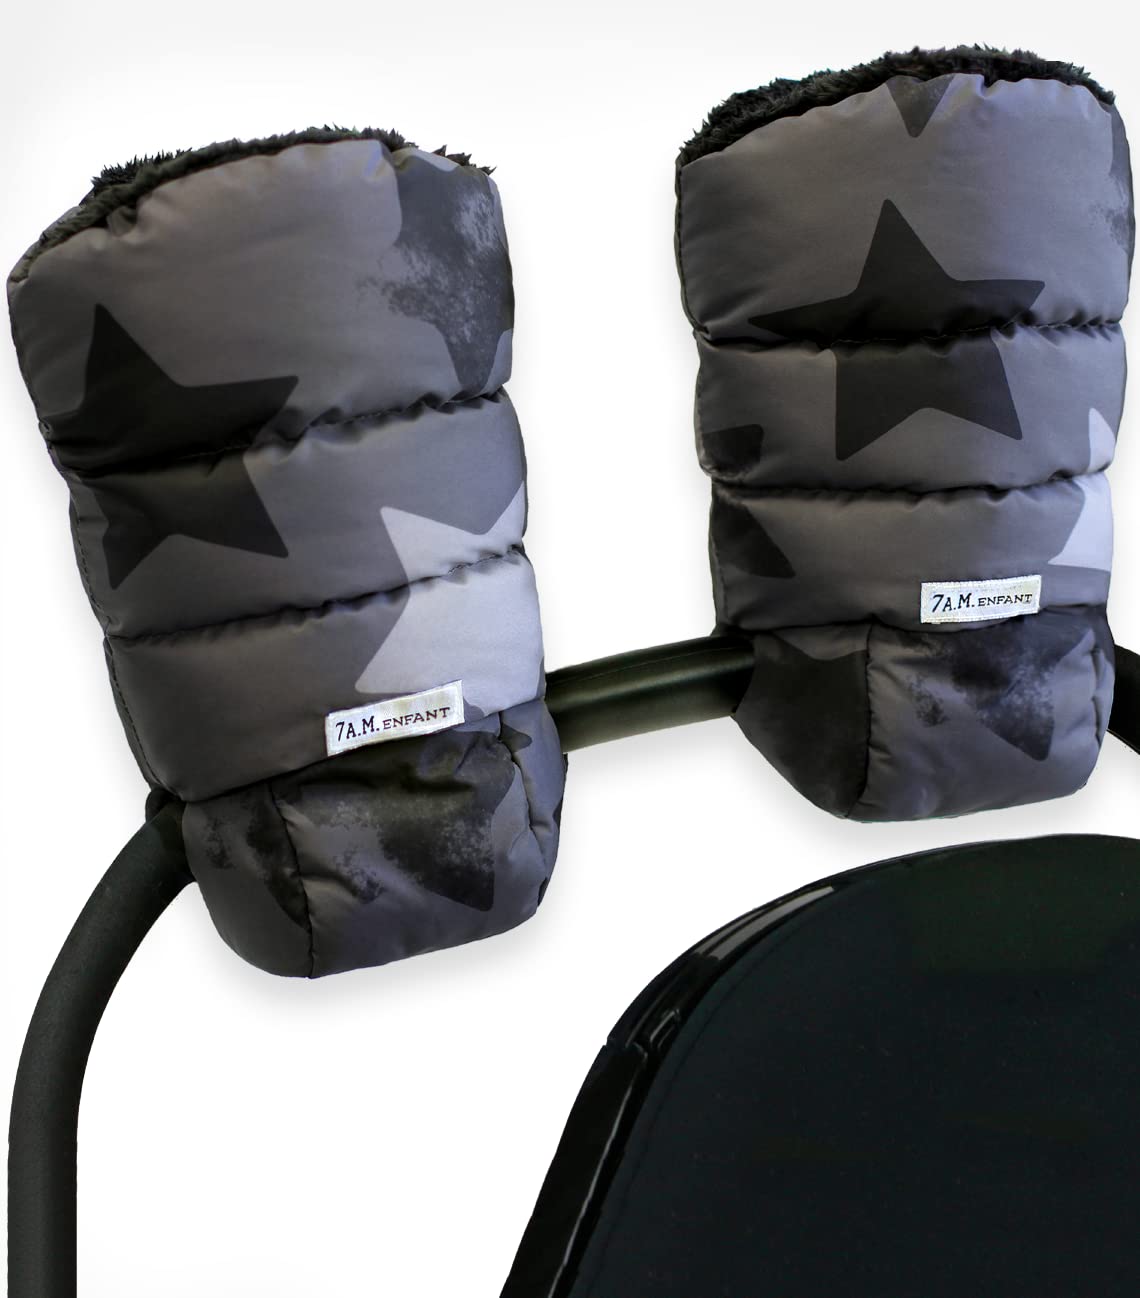 7AM Enfant Stroller Warmmuffs - Hand Warmers with Anti- Freeze Cold Weather Water Repellent Warm Hand Gloves for Pushchai